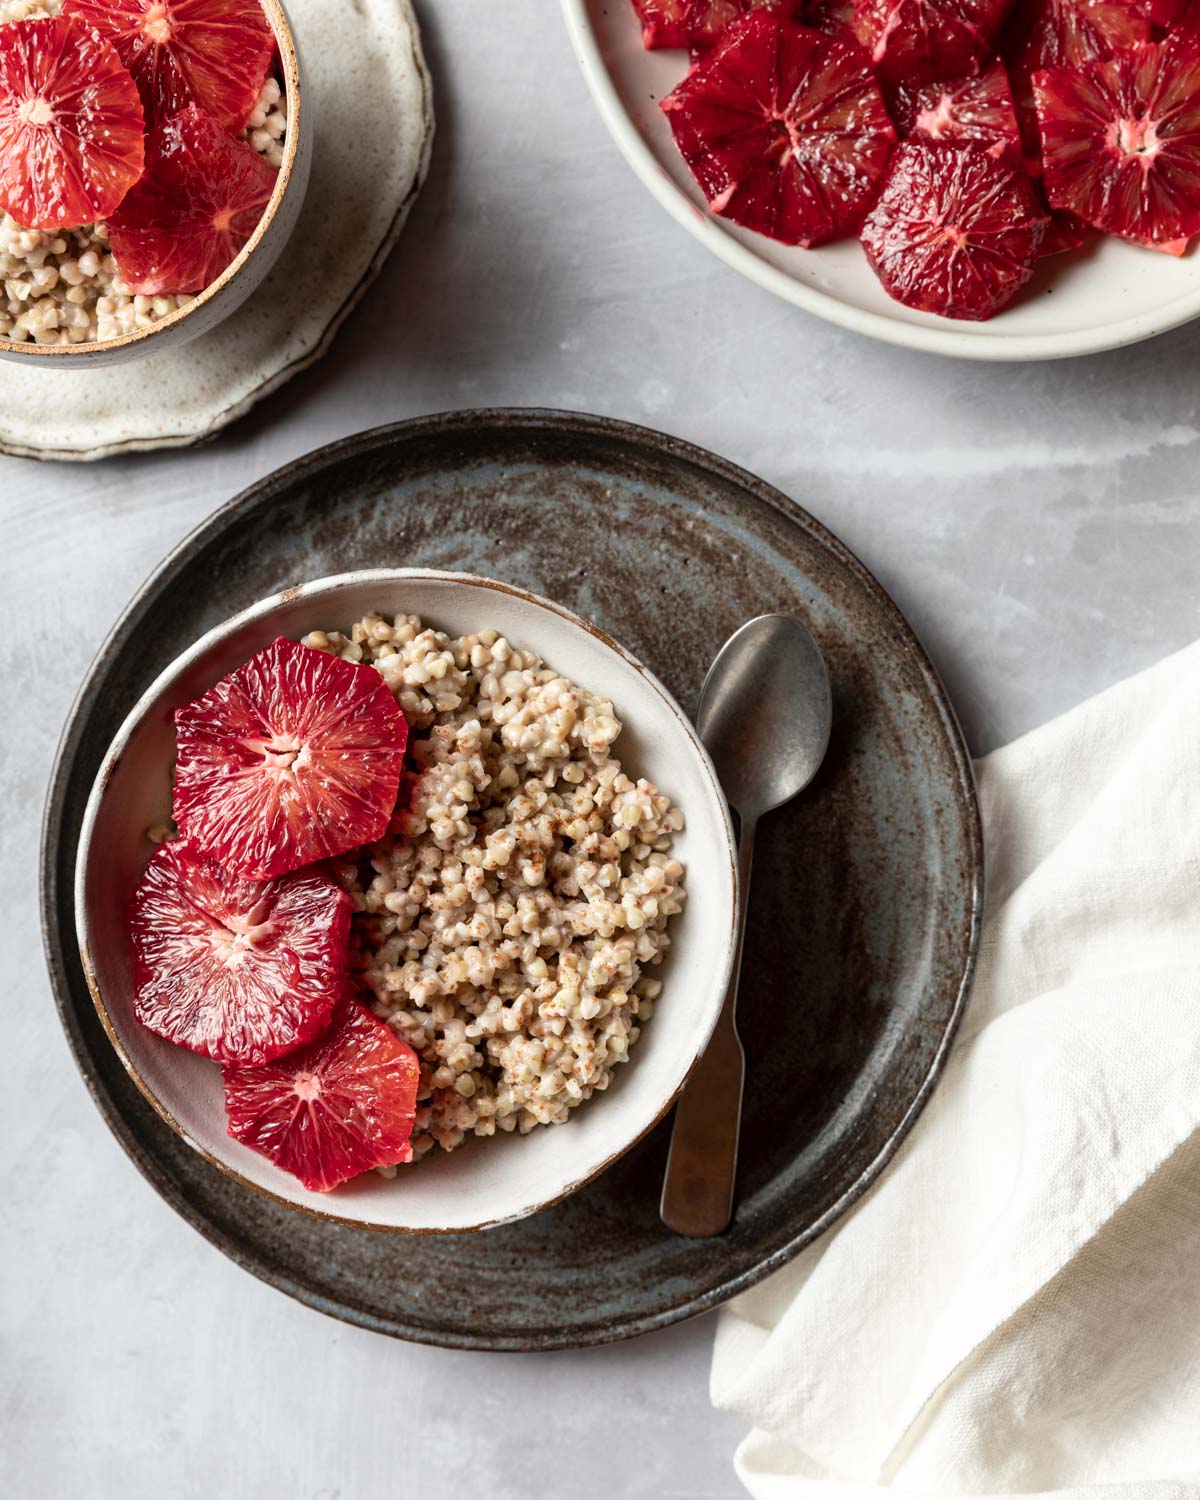 Buckwheat that's been quickly simmered in coconut milk and maple syrup is topped off with slices of blood oranges to make a quick and hearty breakfast.